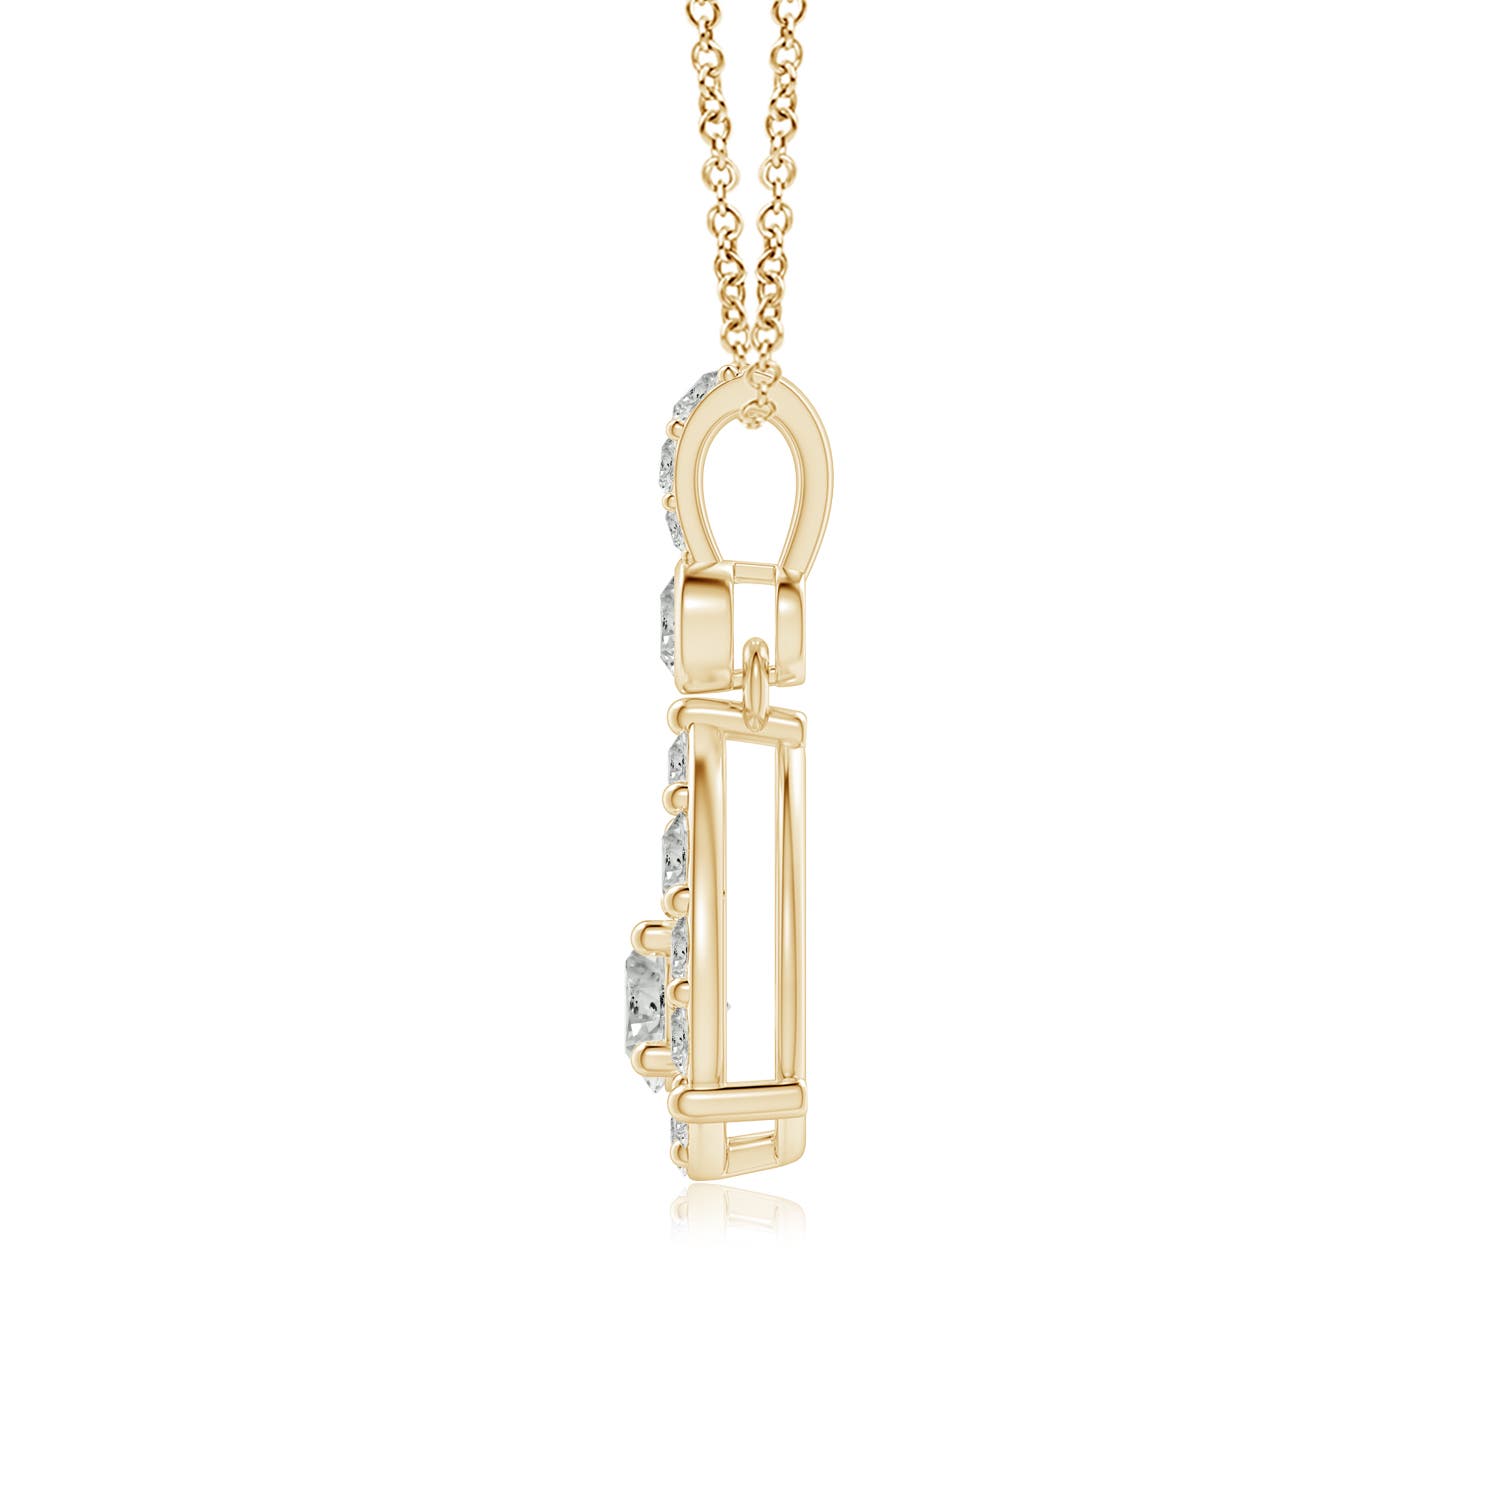 K, I3 / 0.73 CT / 14 KT Yellow Gold